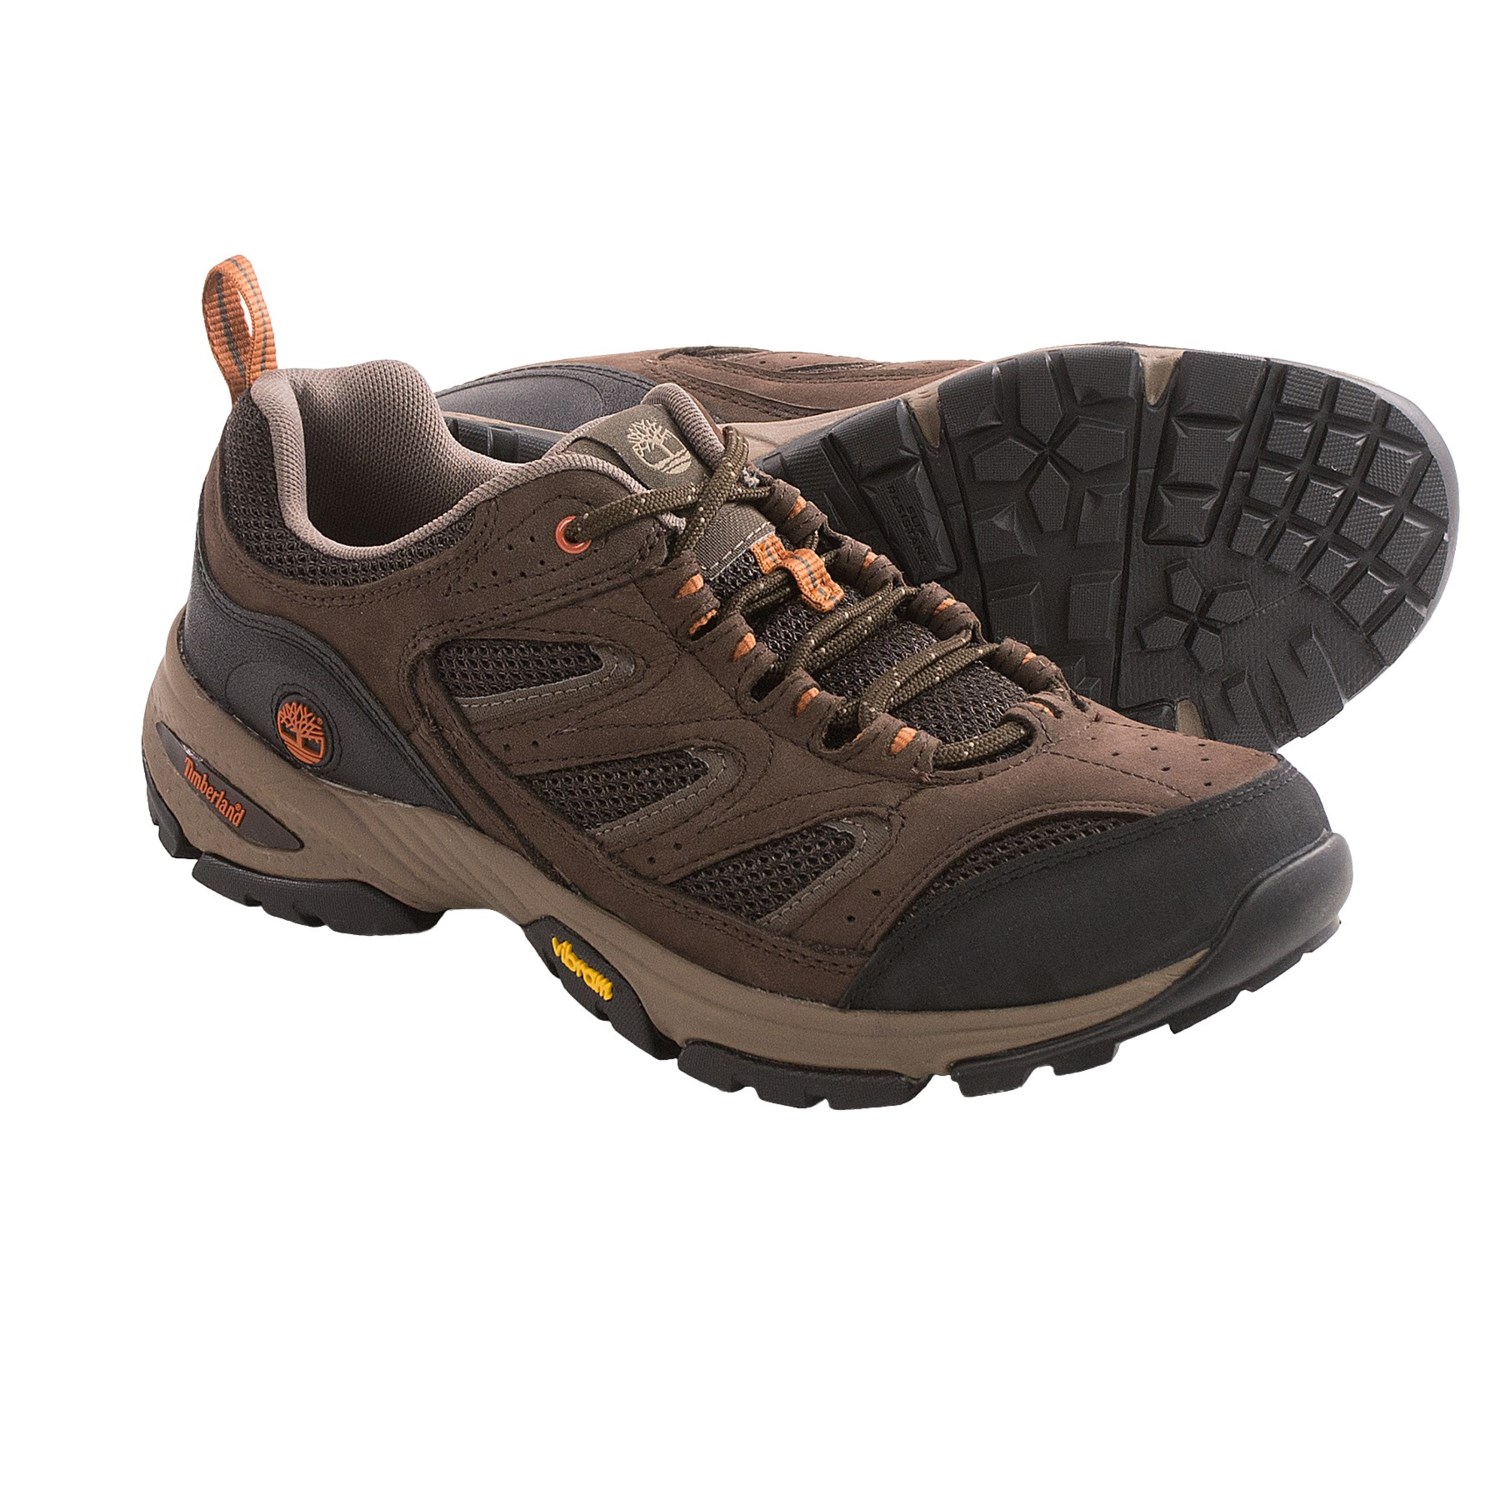 Timberland Ledge Low Hiking Shoes (For Men) 9554V - Save 56%